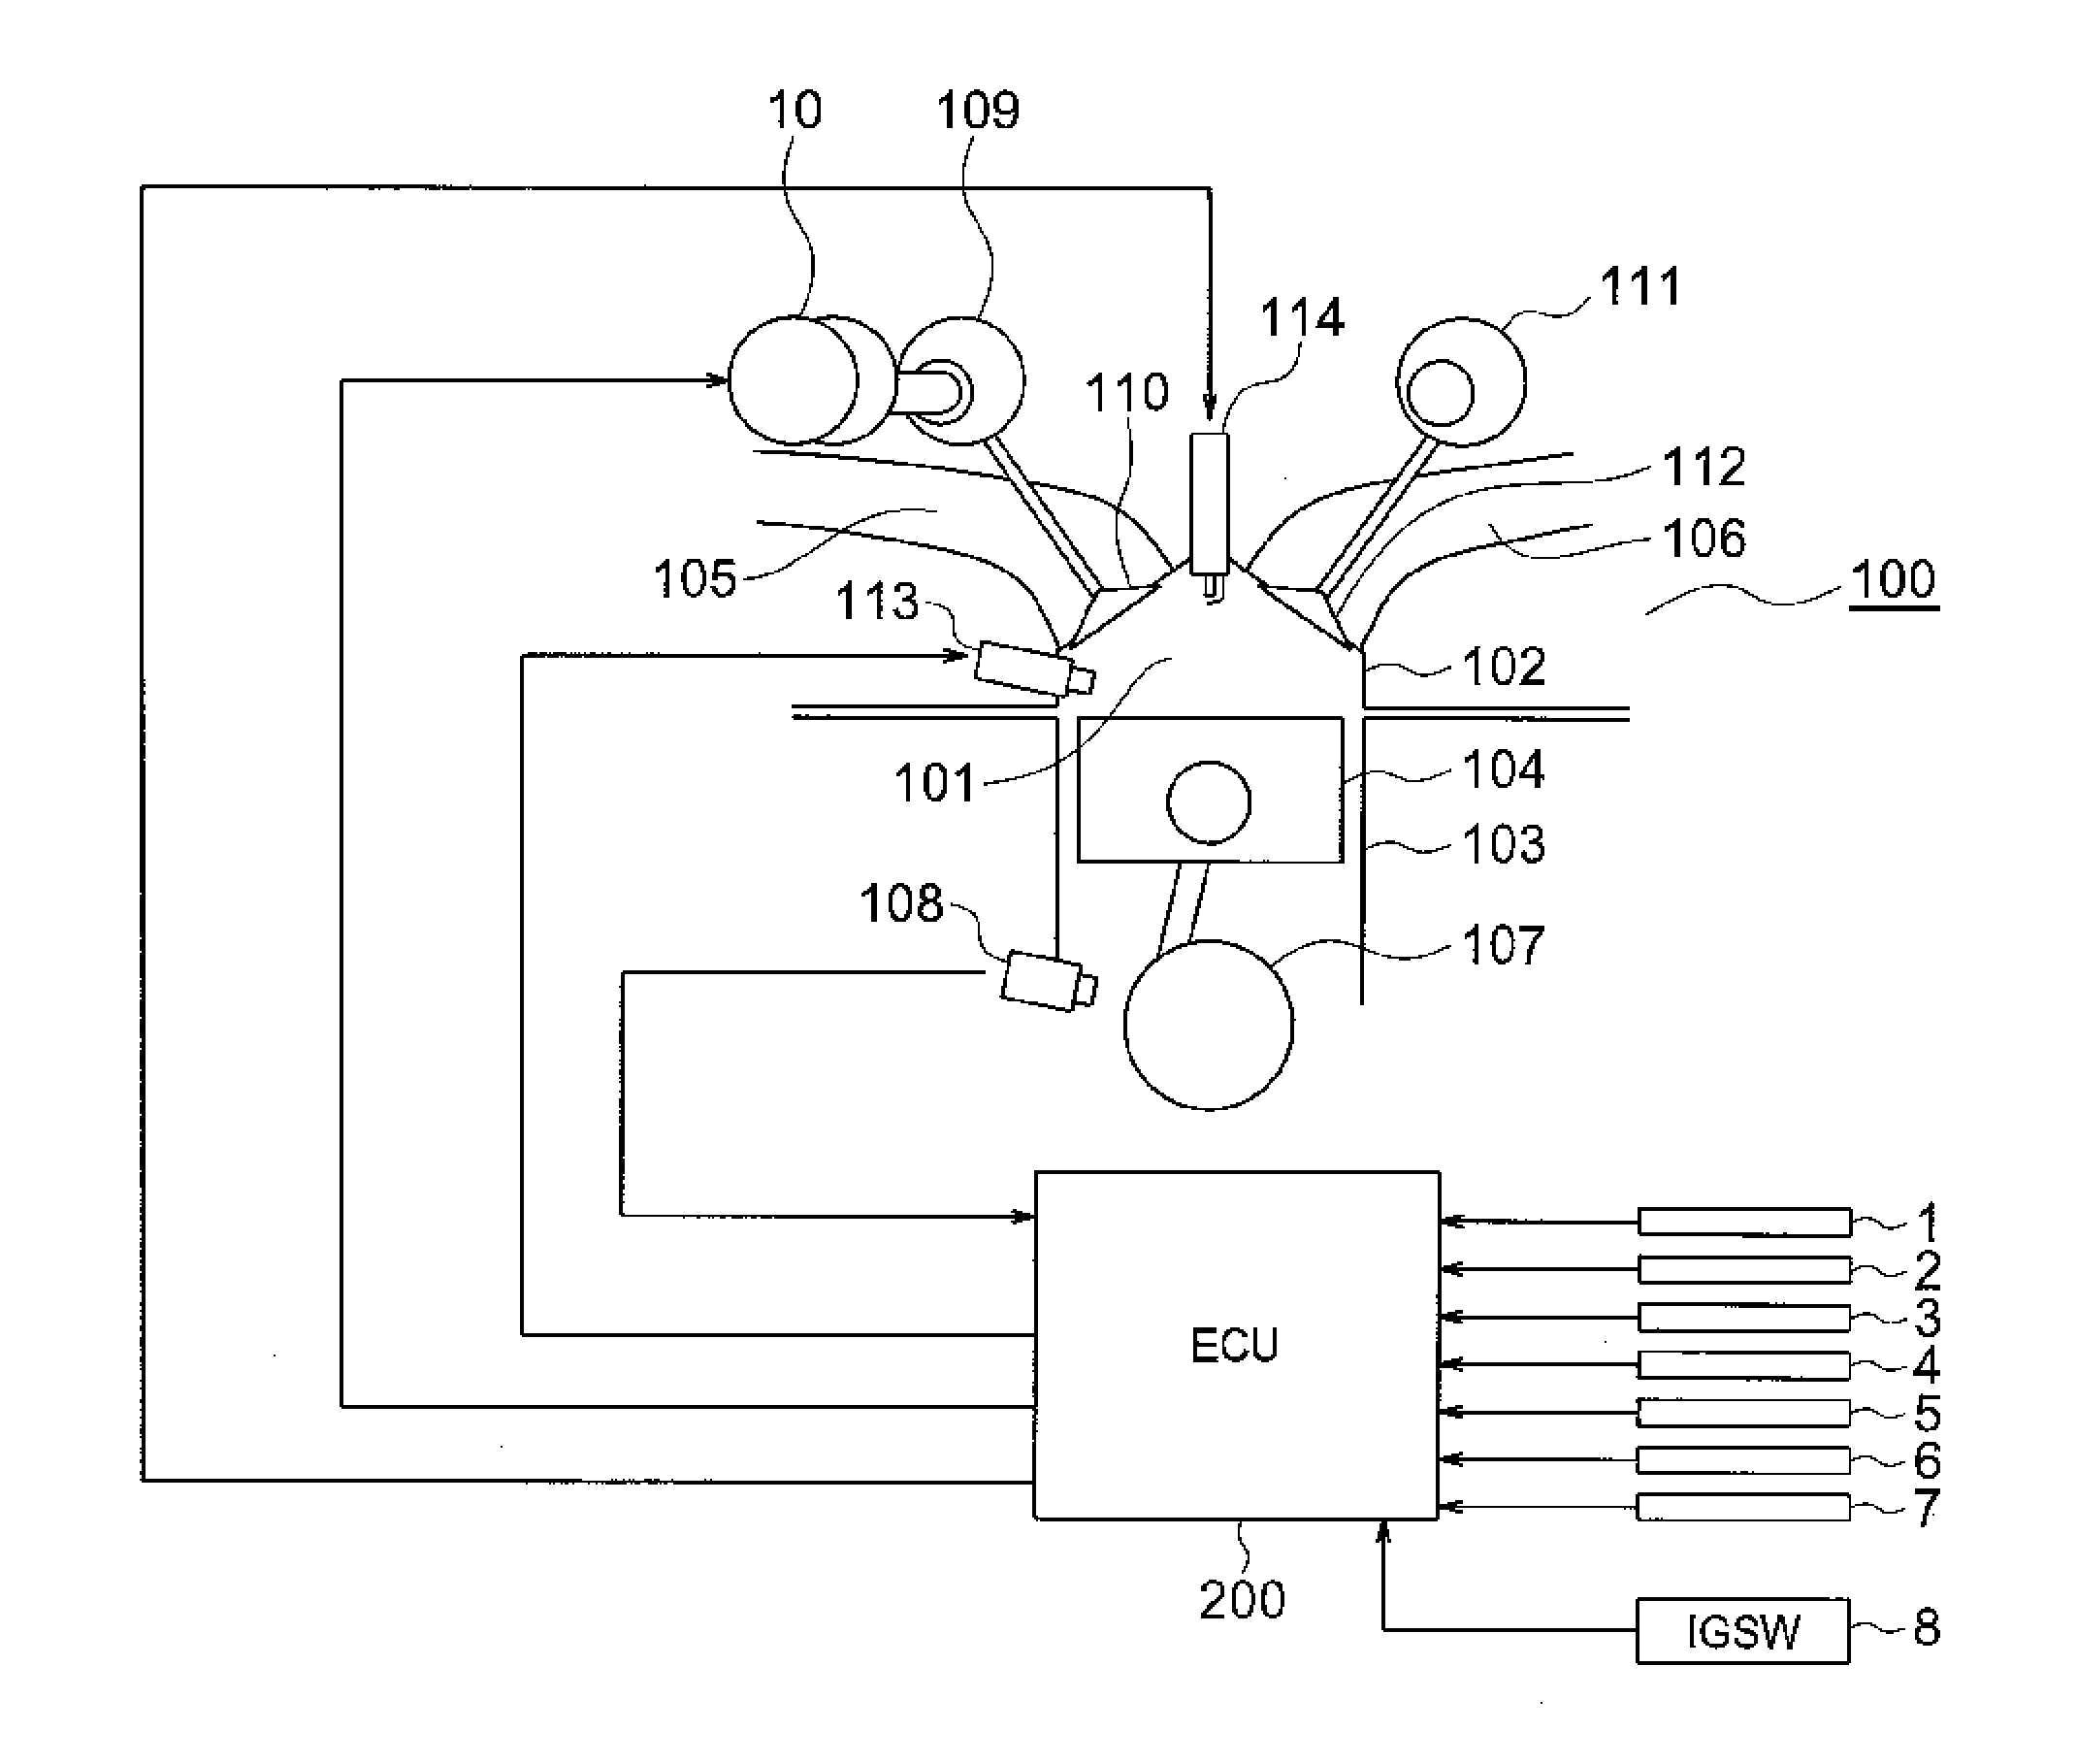 Pre-ignition estimation/control device for an internal combustion engine